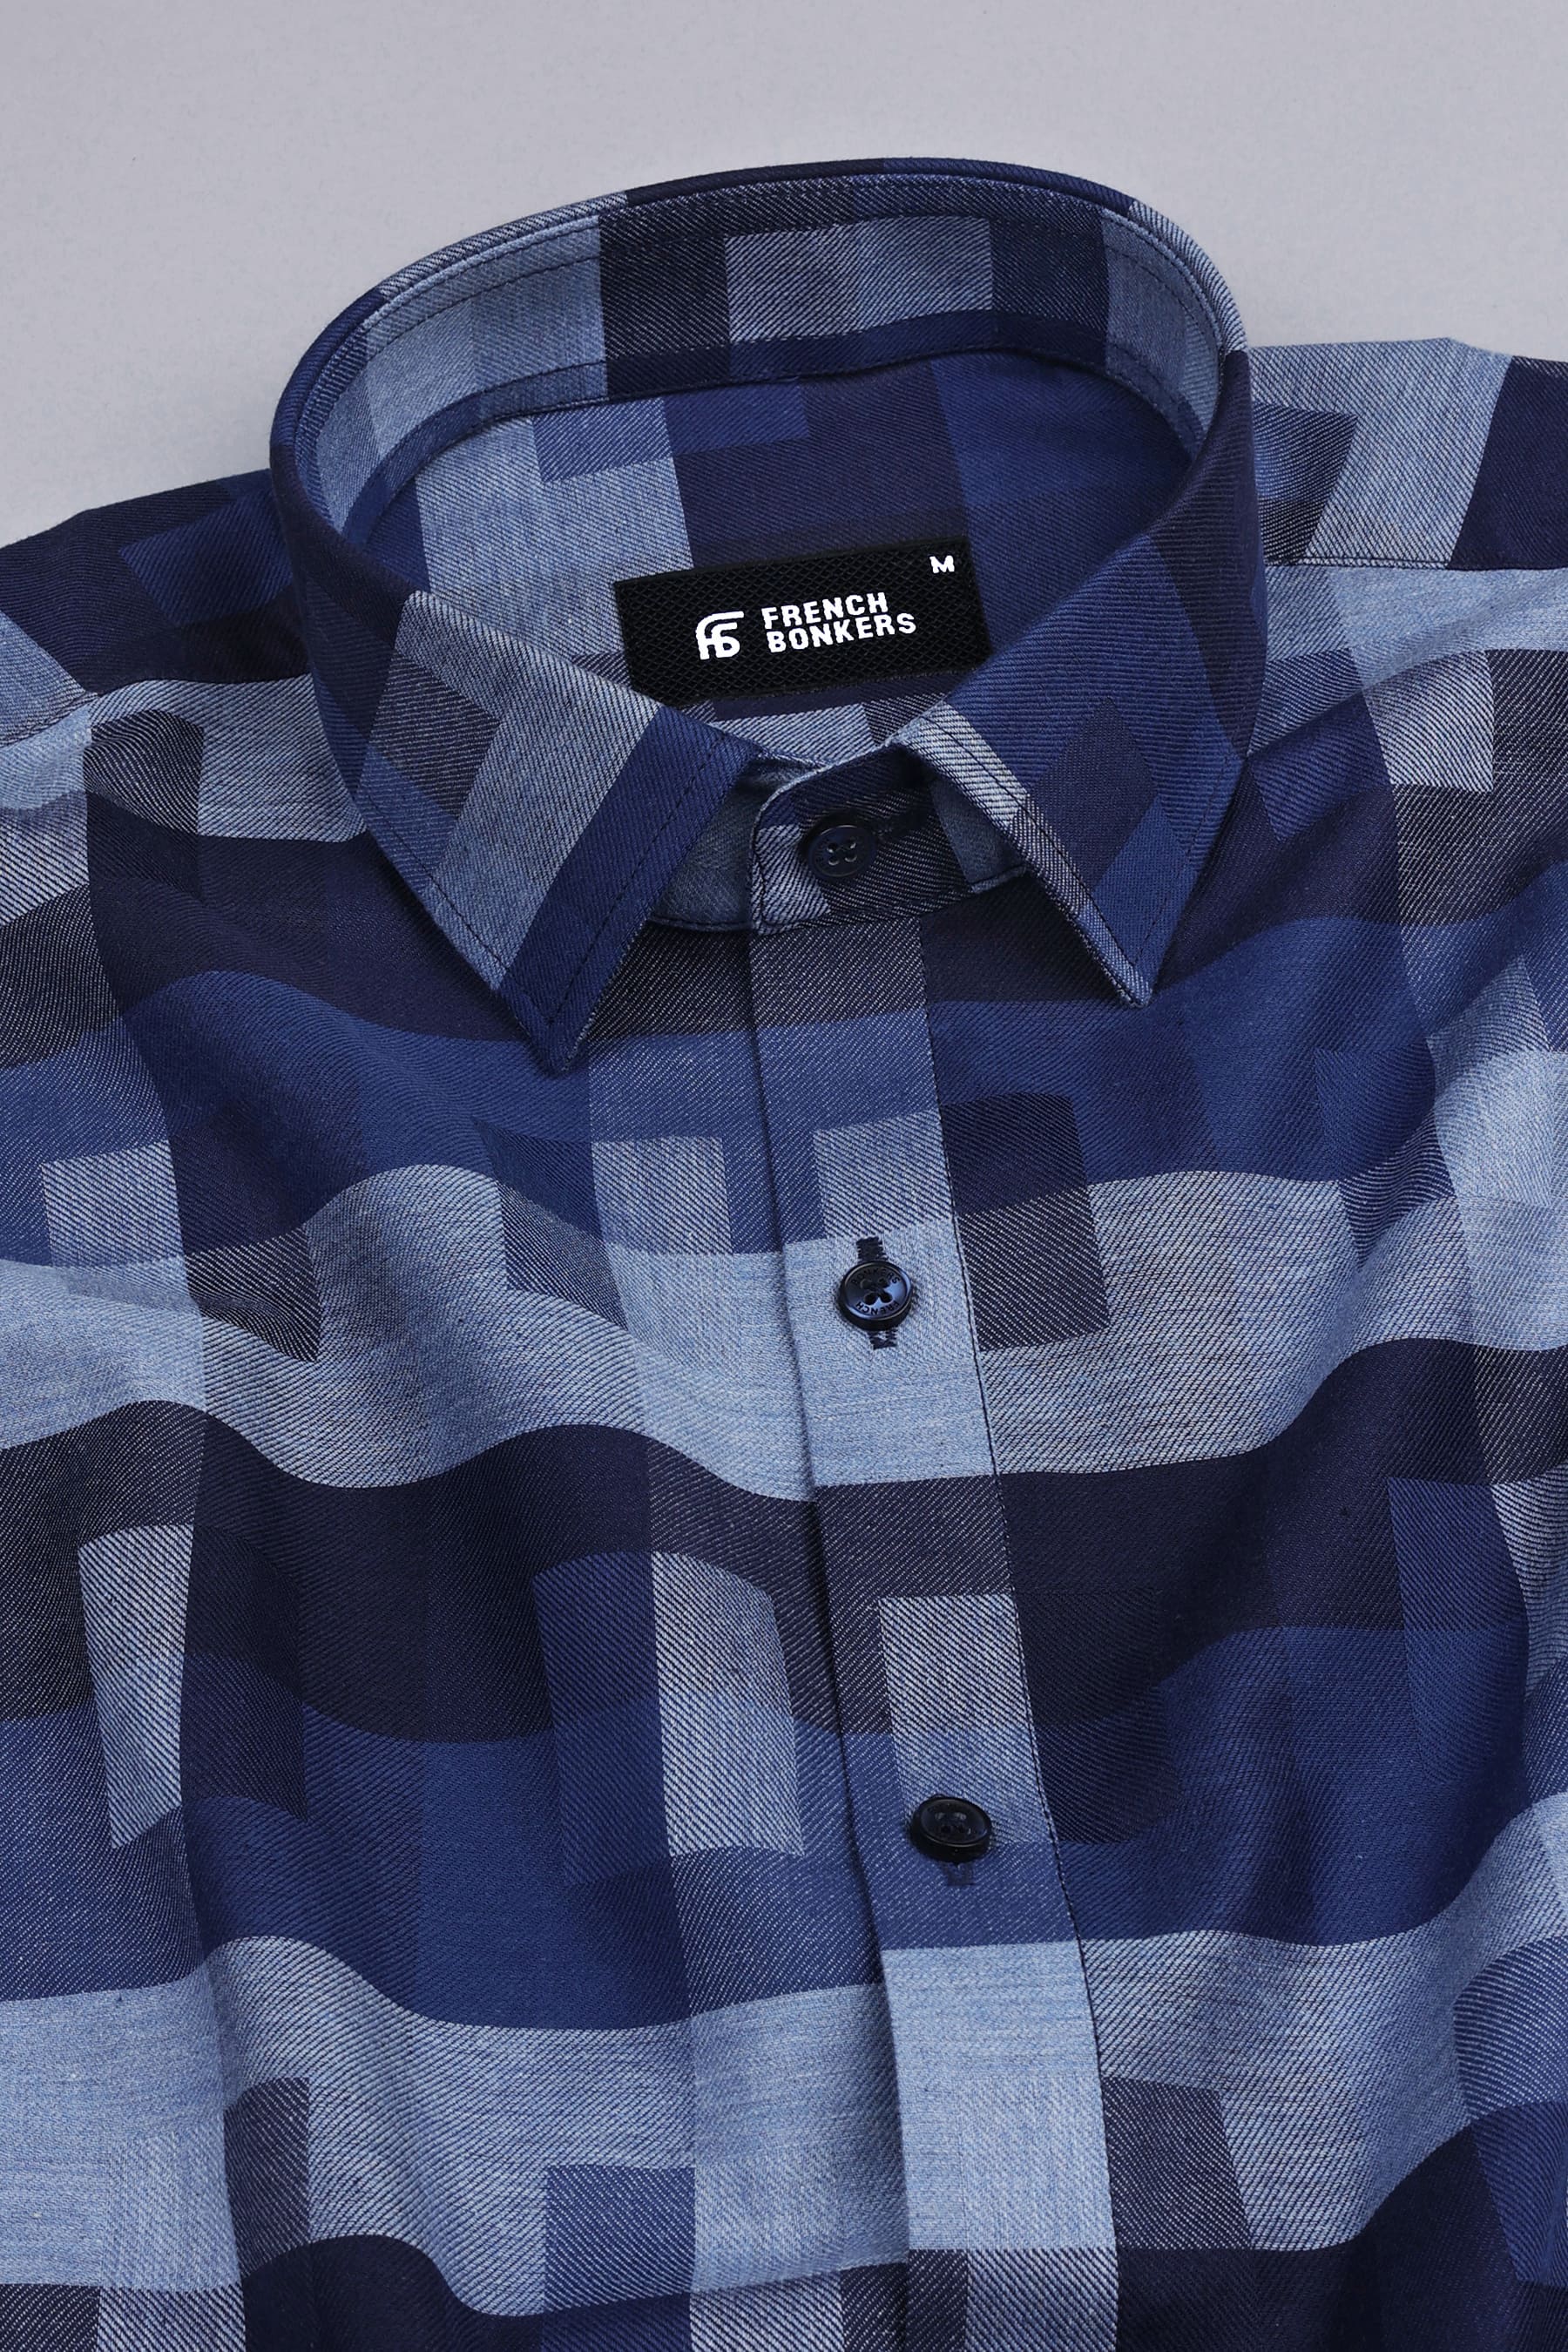 Berry and yonder blue tattershall check shirt